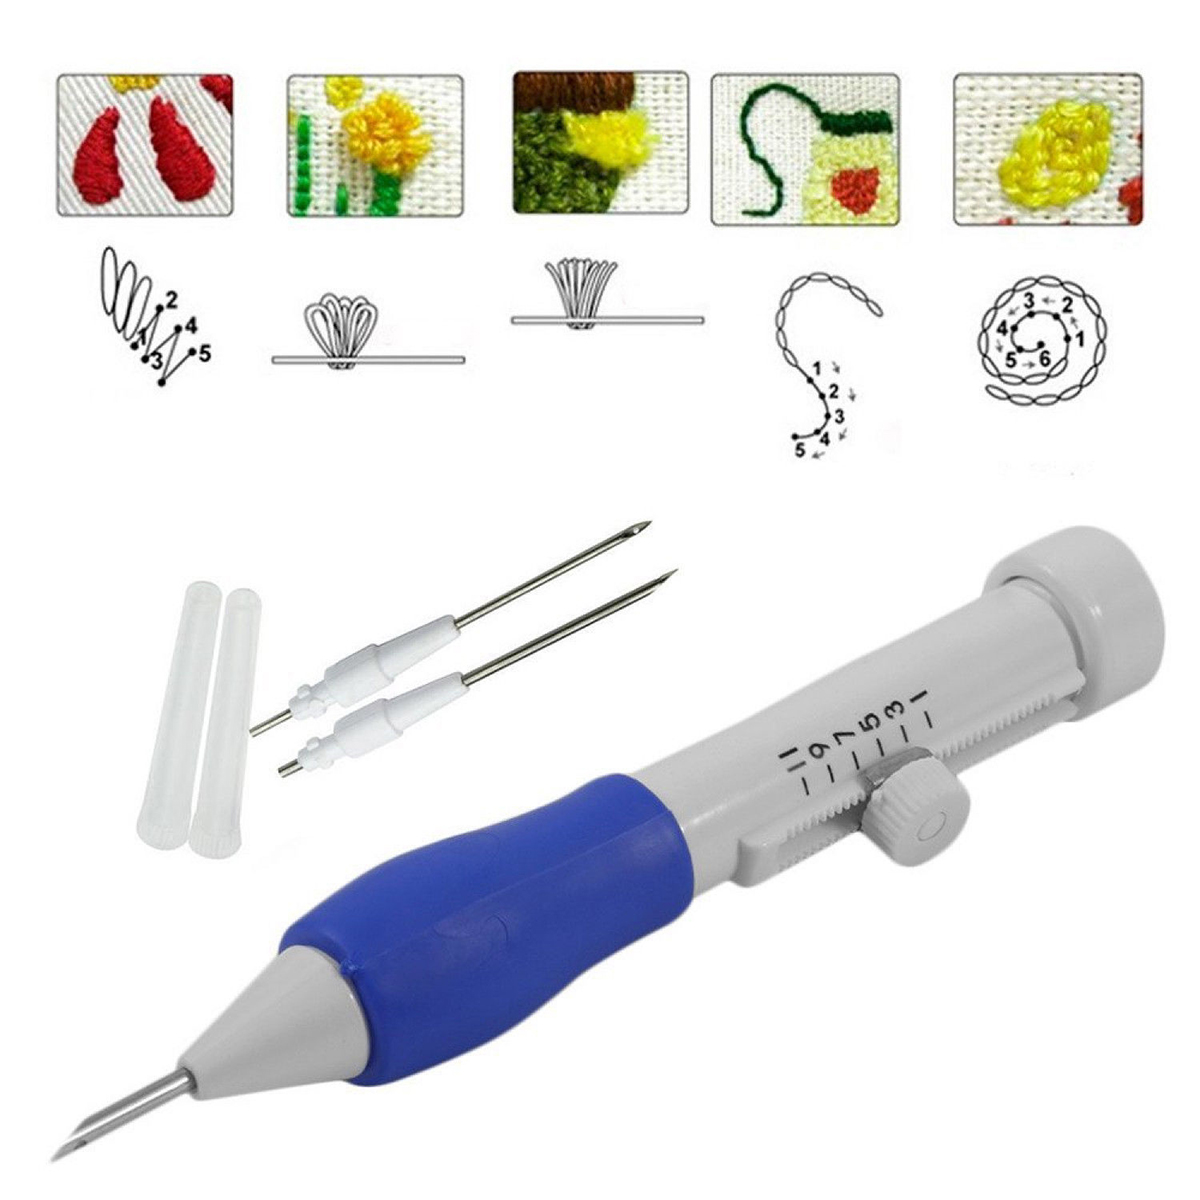 DIY-Embroidery-Pen-Set-Knitting-Sewing-Tools-Kit-Punch-Needle-Adjustable-1634278-3